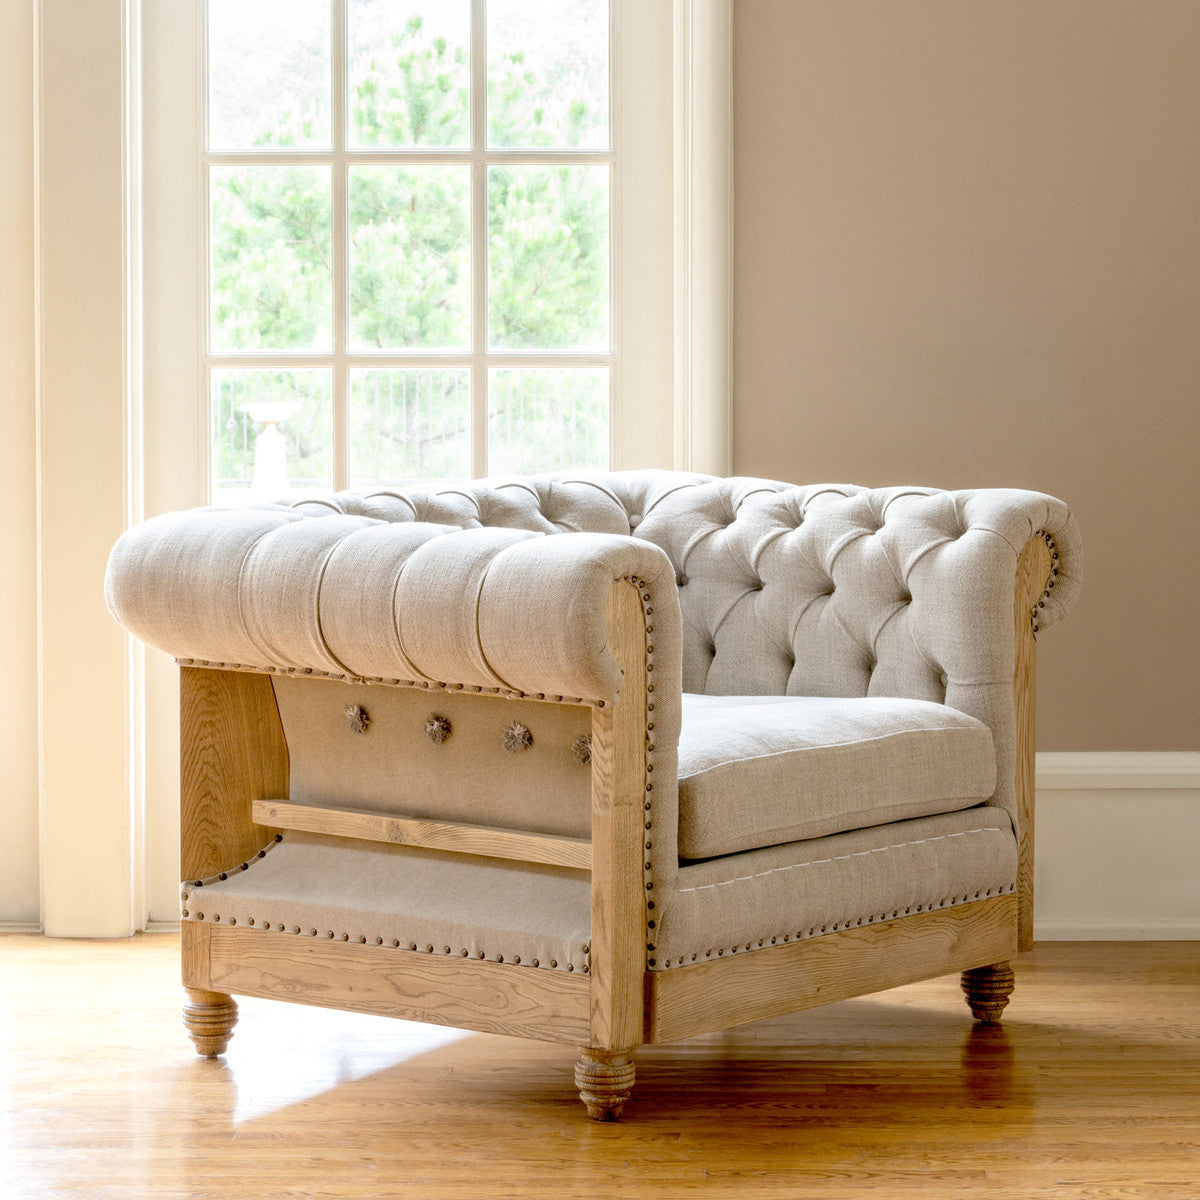 tufted chair in front of a window with hard wood floors